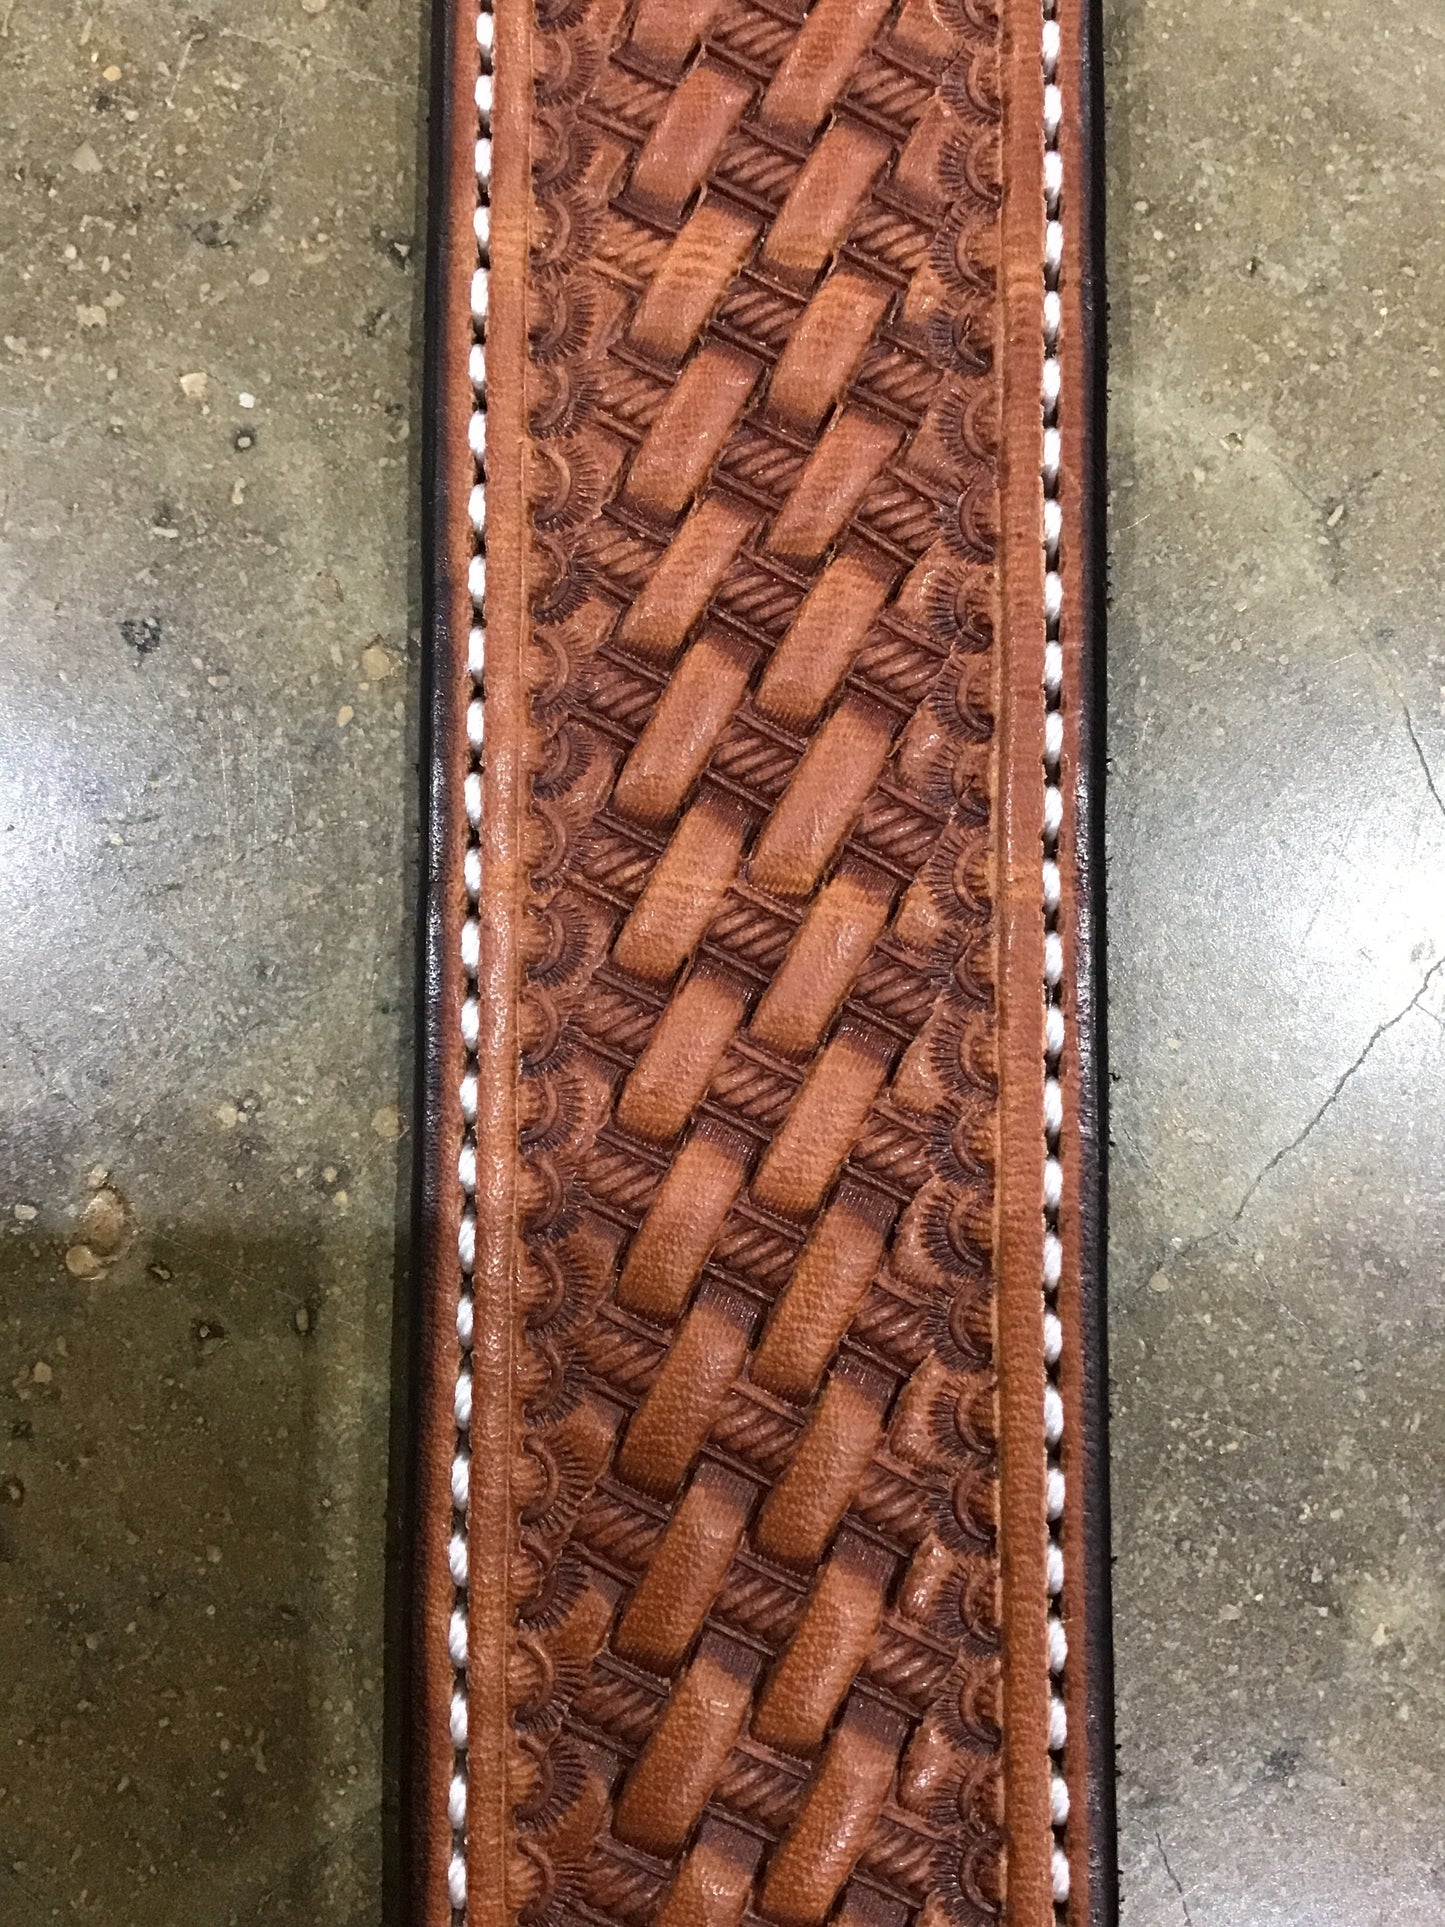 Tan/Brown Woven Leather Belt